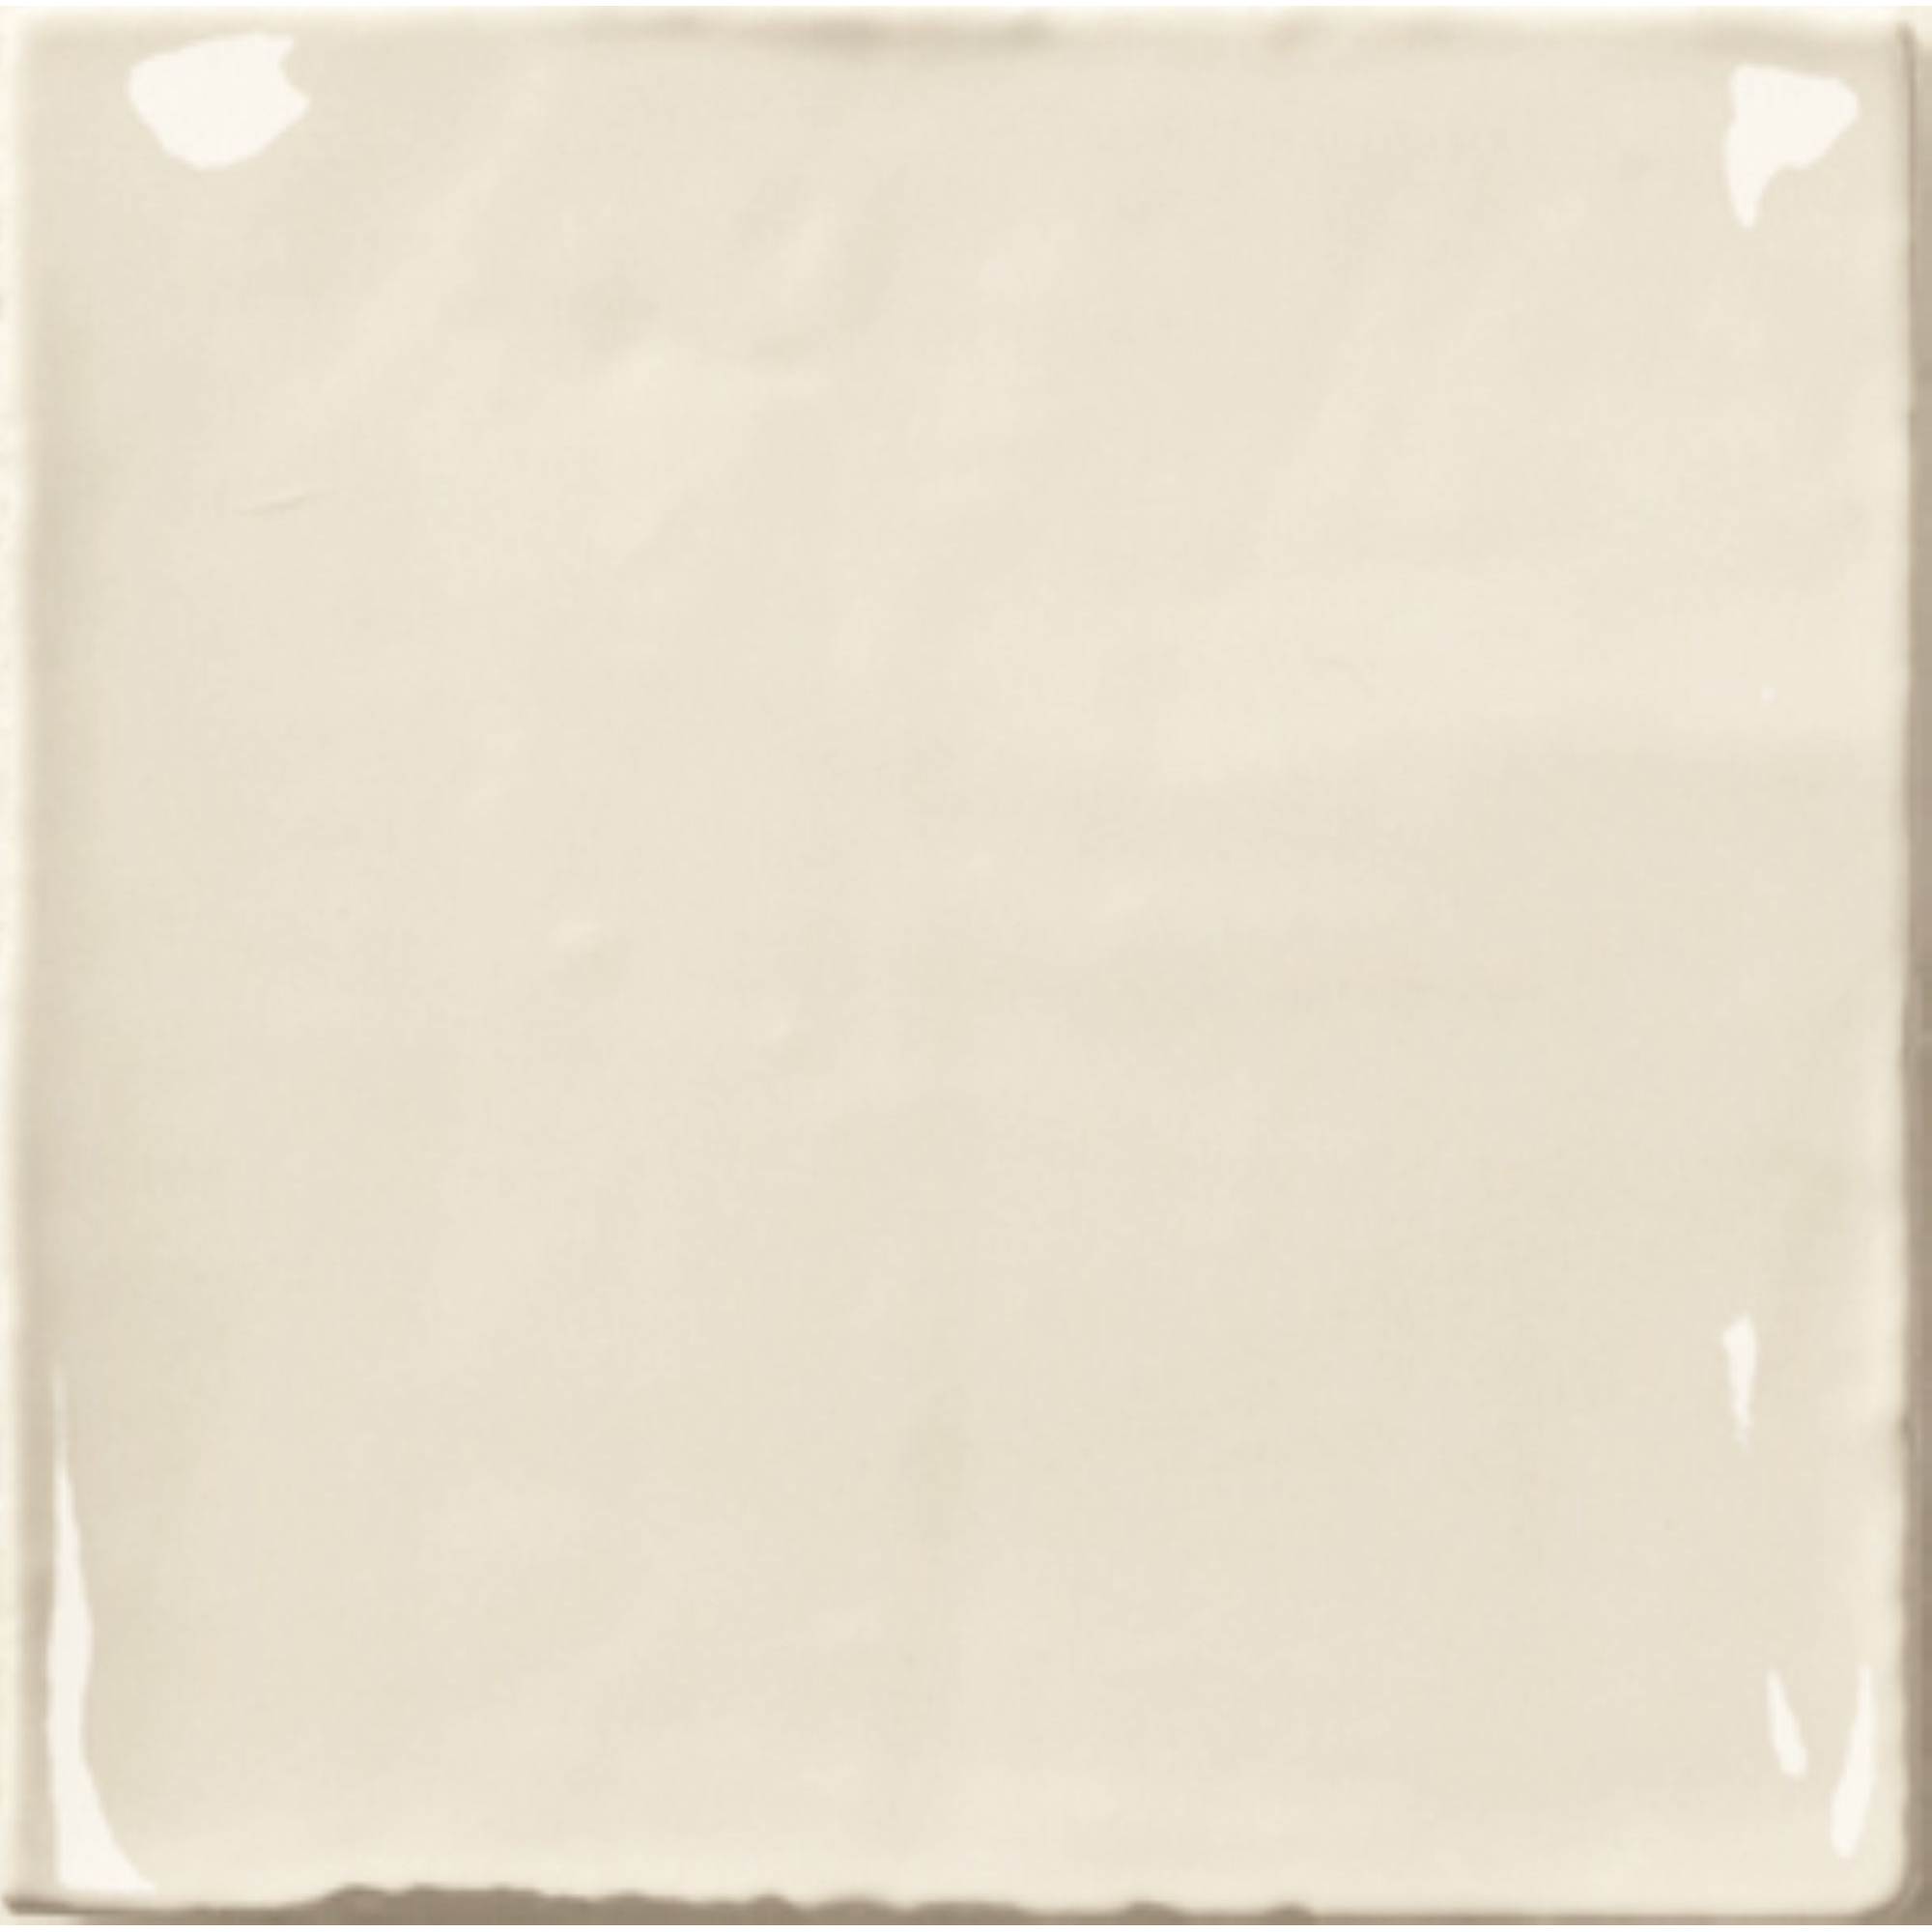 Wandfliese 'Crayon' beige 13 x 13 cm + product picture